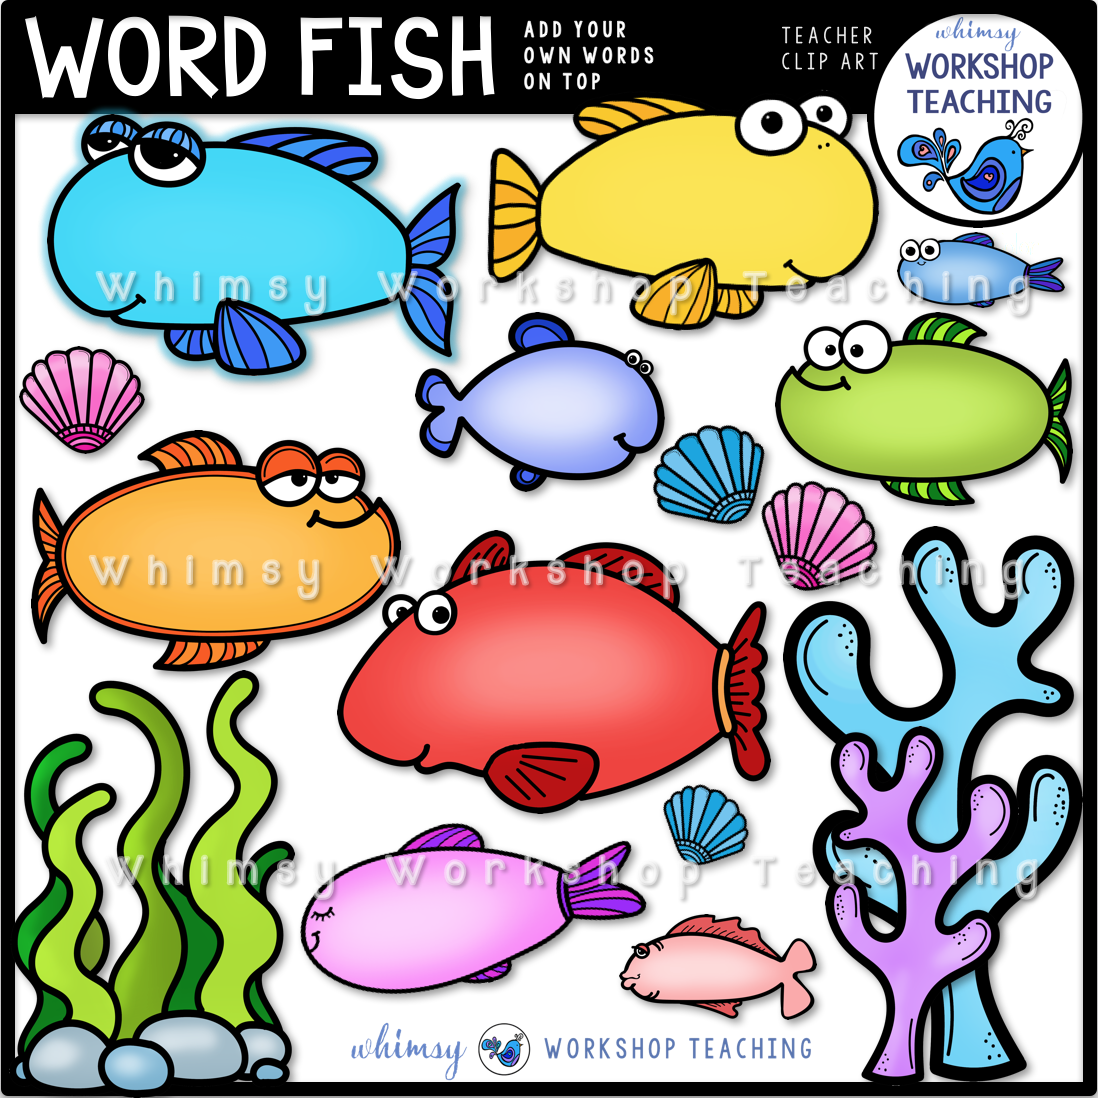 Word of fish. Fish Word. Fish with Words.